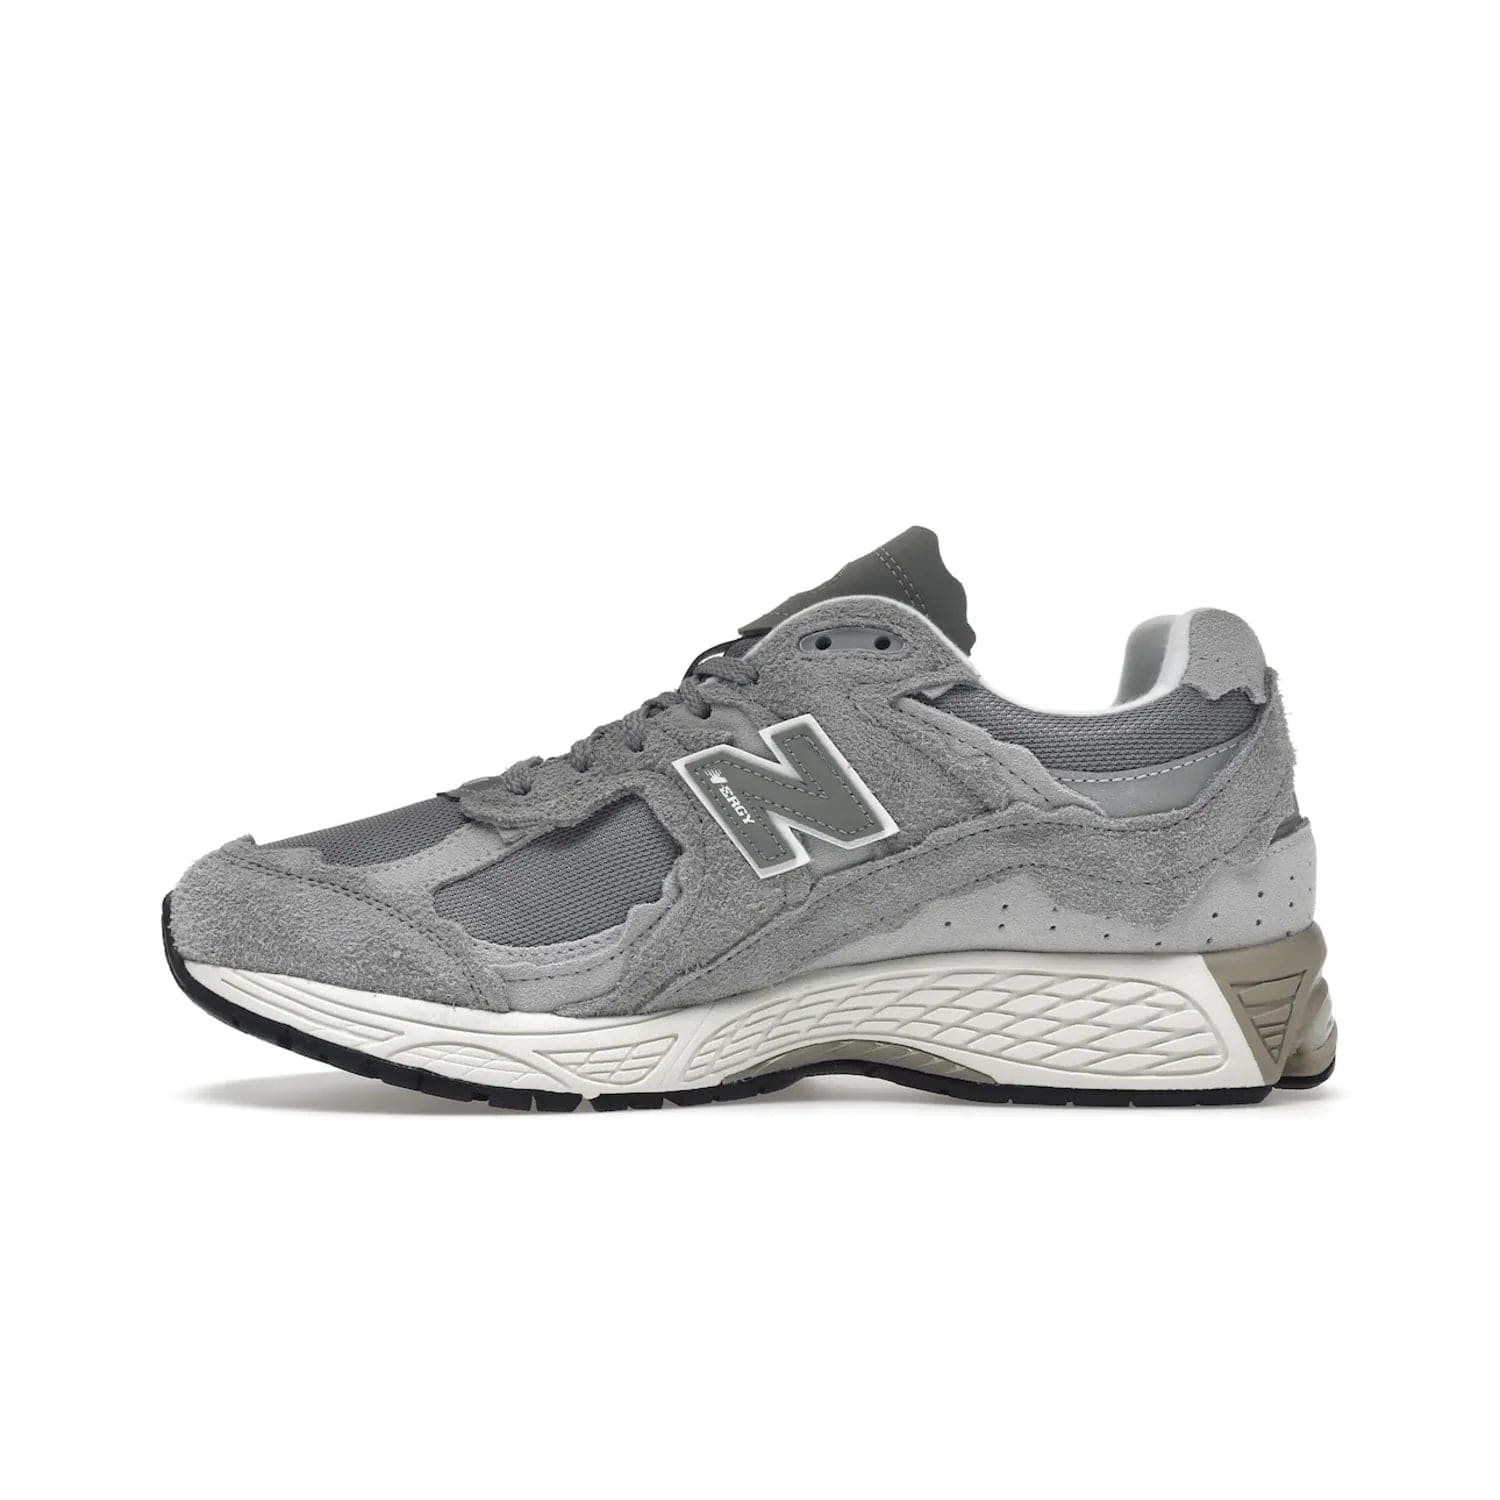 New Balance 2002R Protection Pack Grey - Image 19 - Only at www.BallersClubKickz.com - The New Balance 2002R Protection Pack Grey provides superior protection and all-day comfort. It features a blend of synthetic and mesh materials, foam midsole, rubber outsole, and a toe cap and heel counter. Show off the classic "N" logo and "2002R" lettering. Get a pair on February 14, 2023 for protection and style.